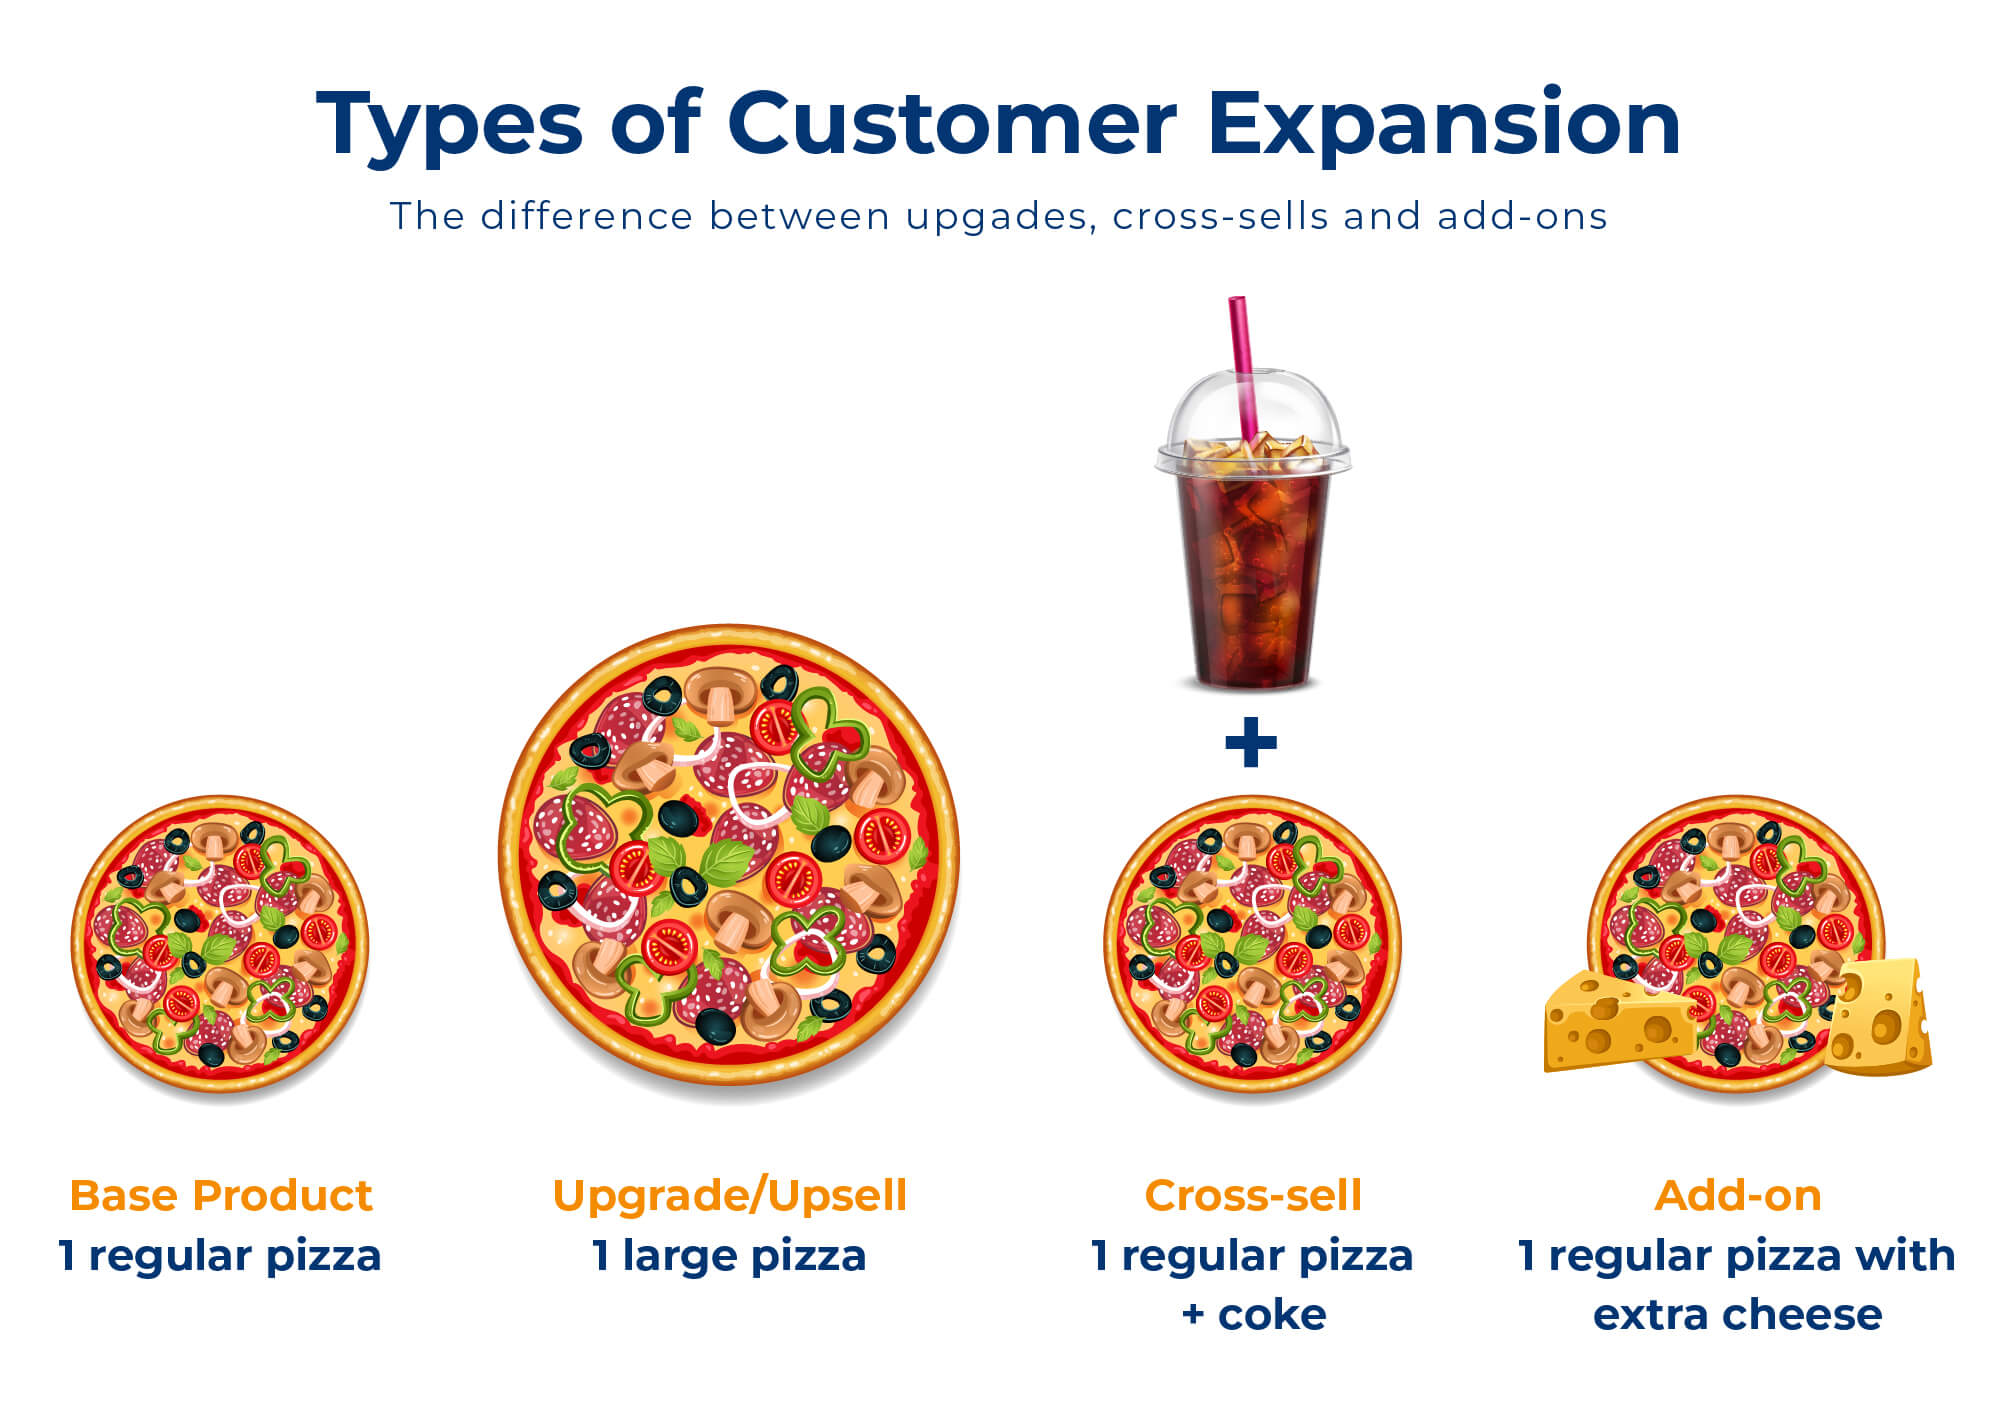 Types of Customer Expansion